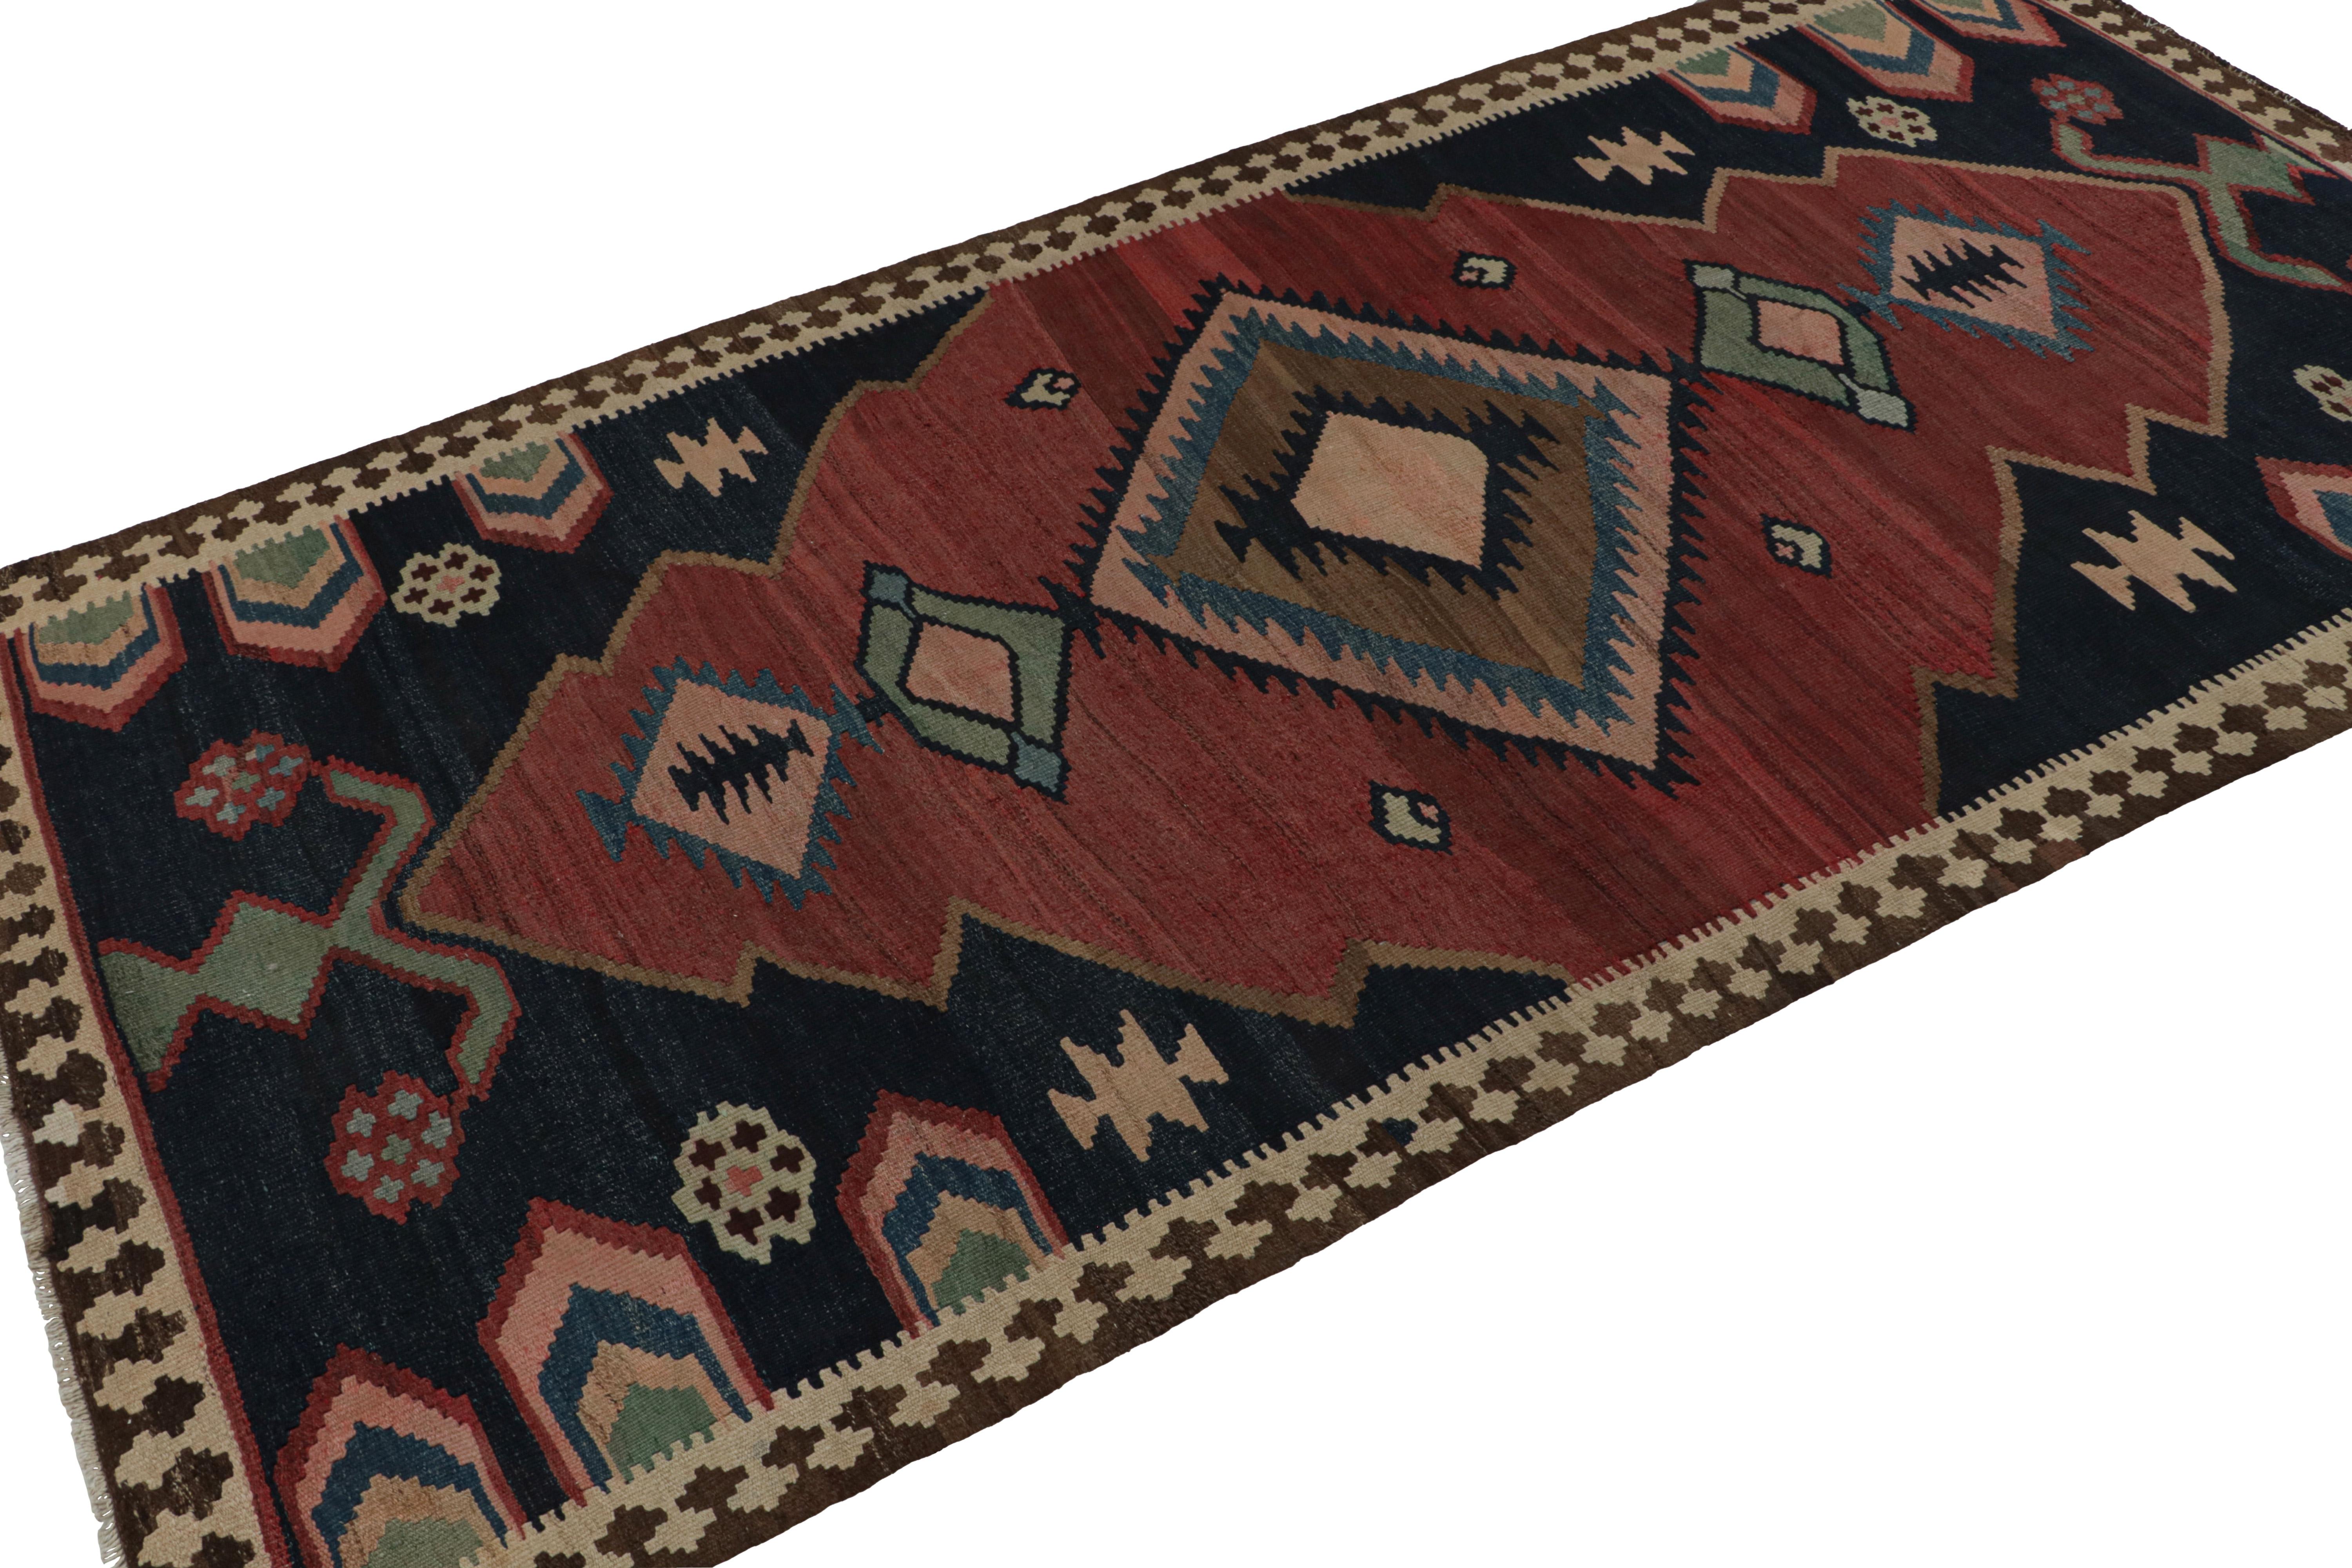 Handwoven in wool, circa 1950-1960, this 5x10 Afghani tribal Kilim rug, with medallion and open field style together, is a special curation in the Rug & Kilim collection. 

On the Design: 

A special piece in the Rug & Kilim collection, this rug